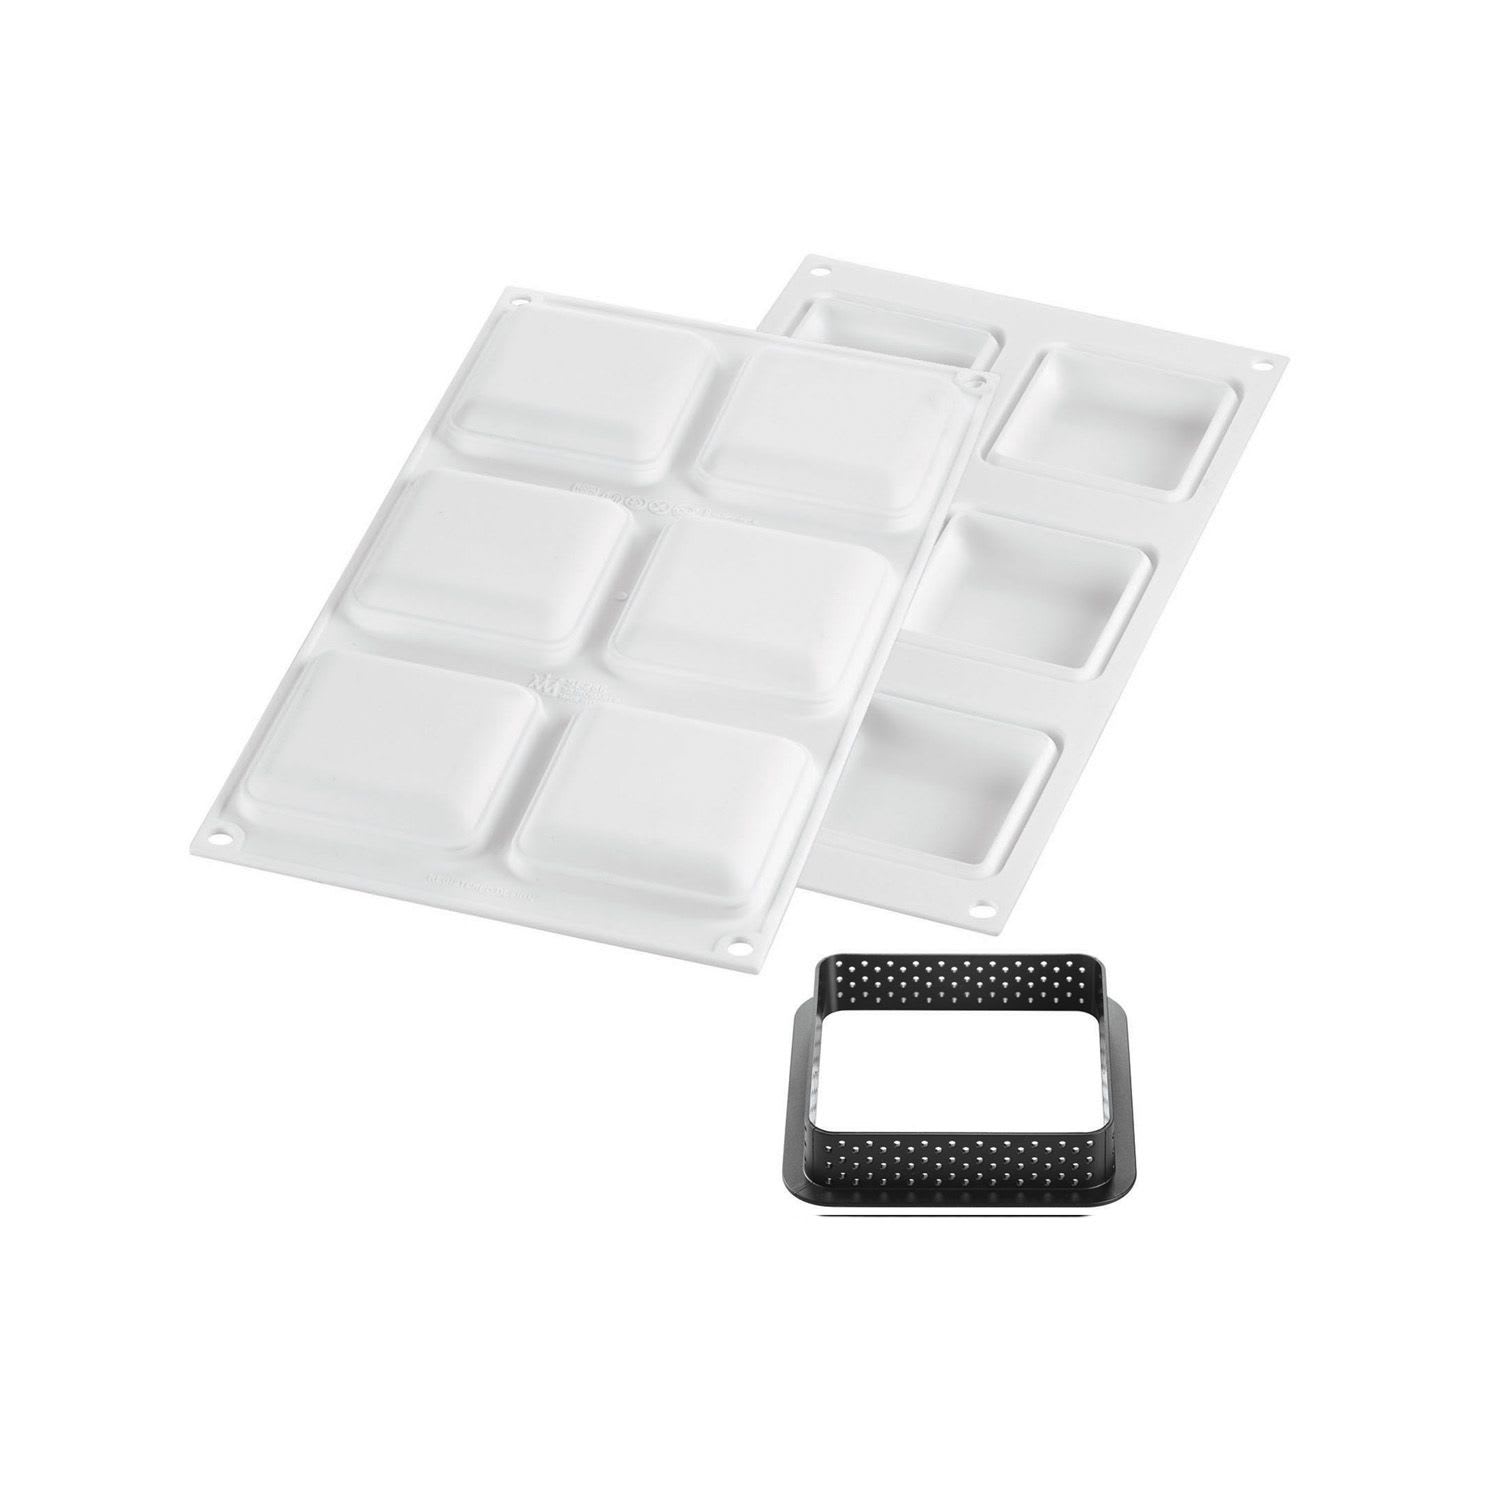 Silikomartkit Tarte Ring Square 200x200 Silicone Mold 6.69 X 6.69 X  0.78 High, Plus 1 Heat-resistant Perforated Plastic Square Cutting Ring :  Target